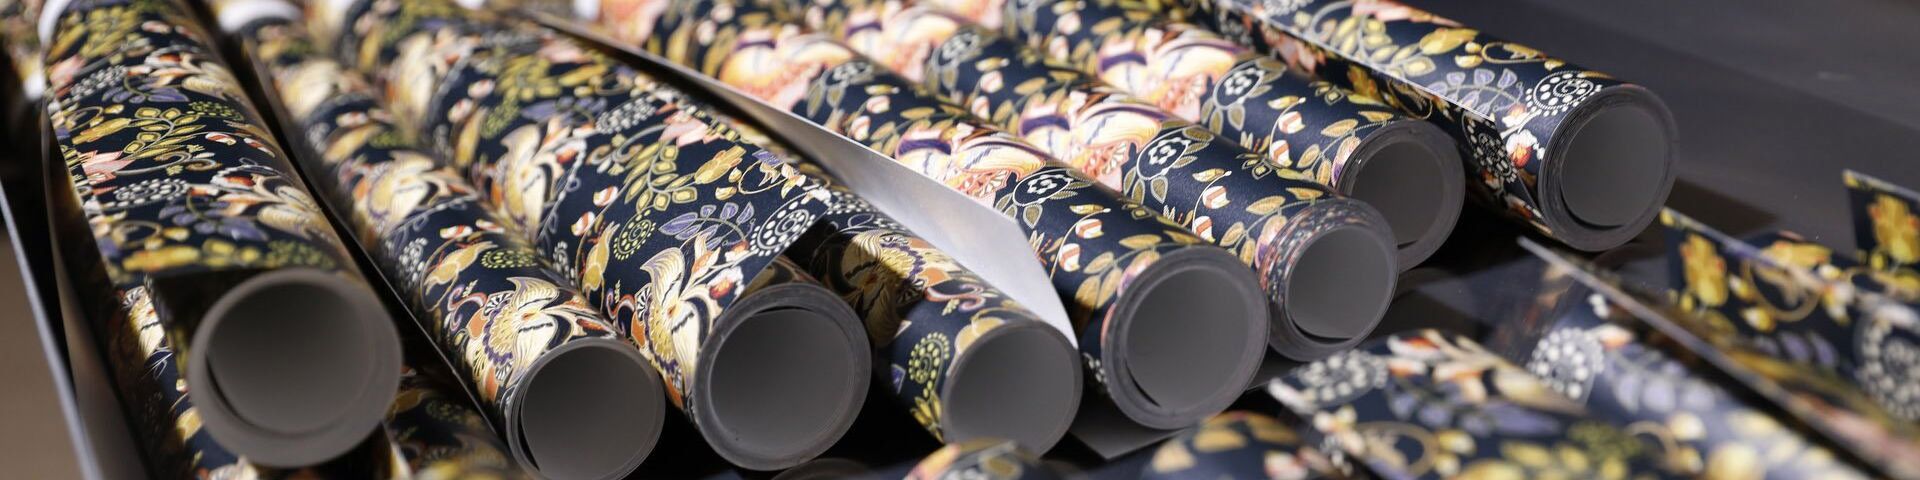 Eight rolls of wallpaper (and more just out of shot), photographed side by side, from the end of the rolls. They are patterned with leaves and flowers on a black background.